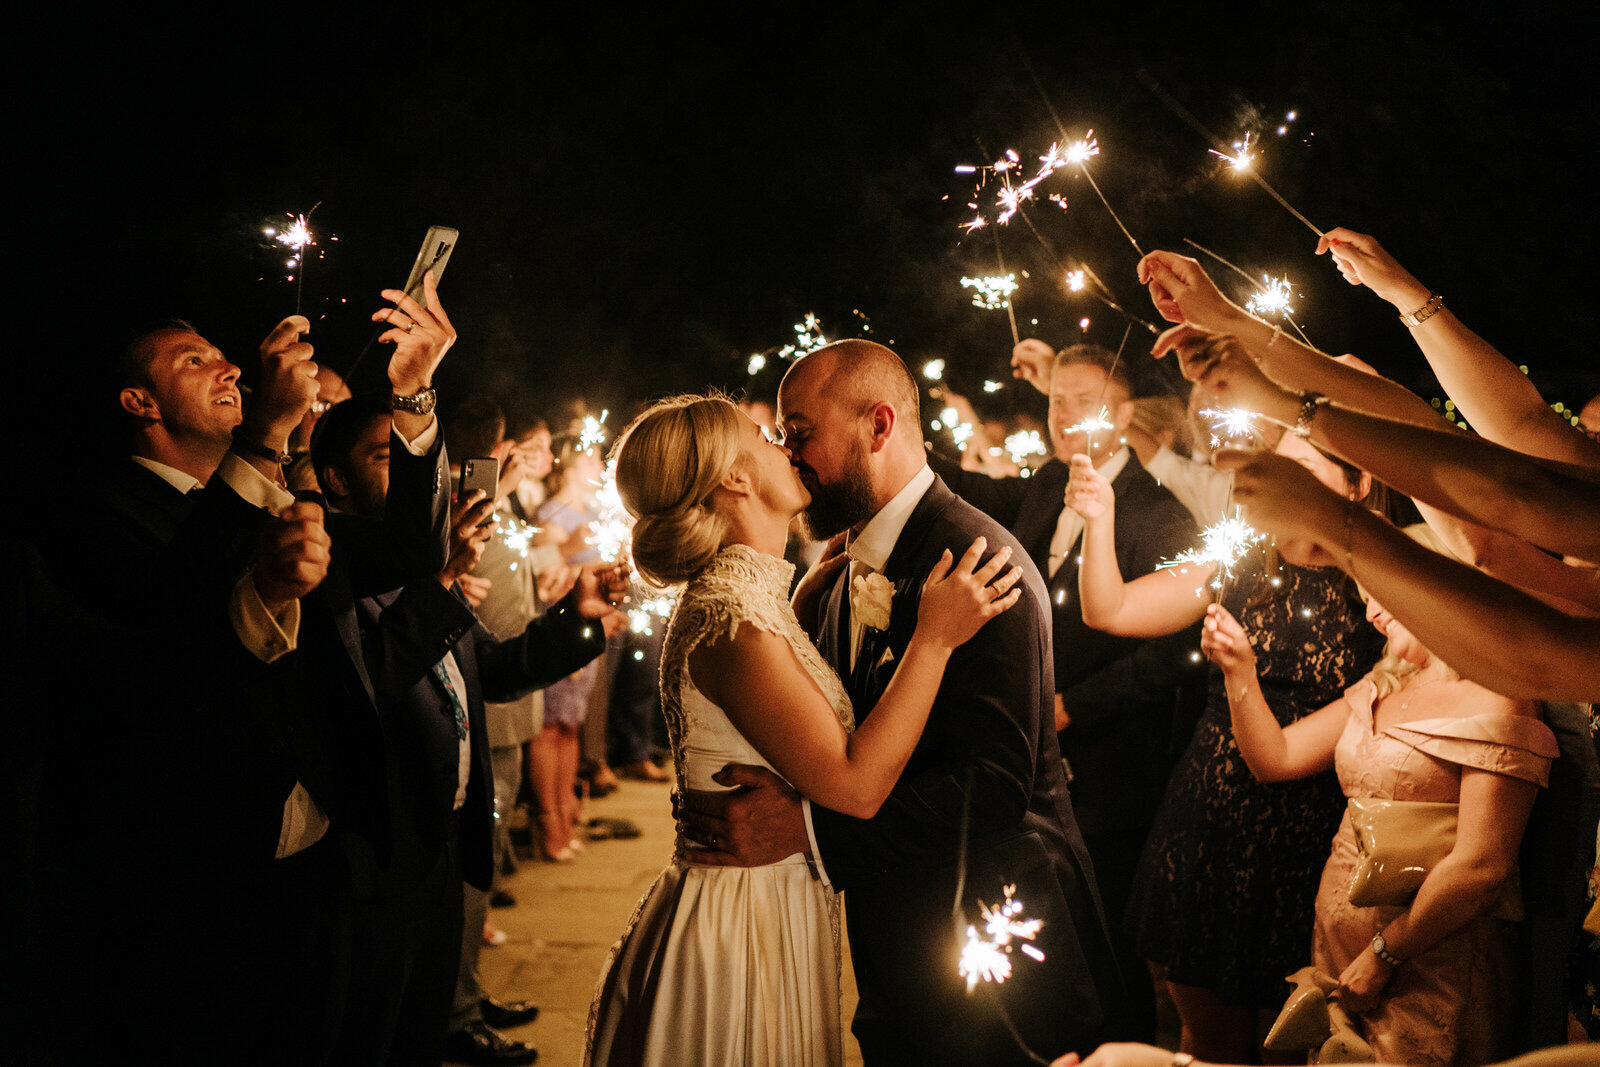 Guests form a tunnel of sparklers around the bride and groom as they hold sparklers and kiss in gorgeous framing outside at Pembroke Lodge during nighttime